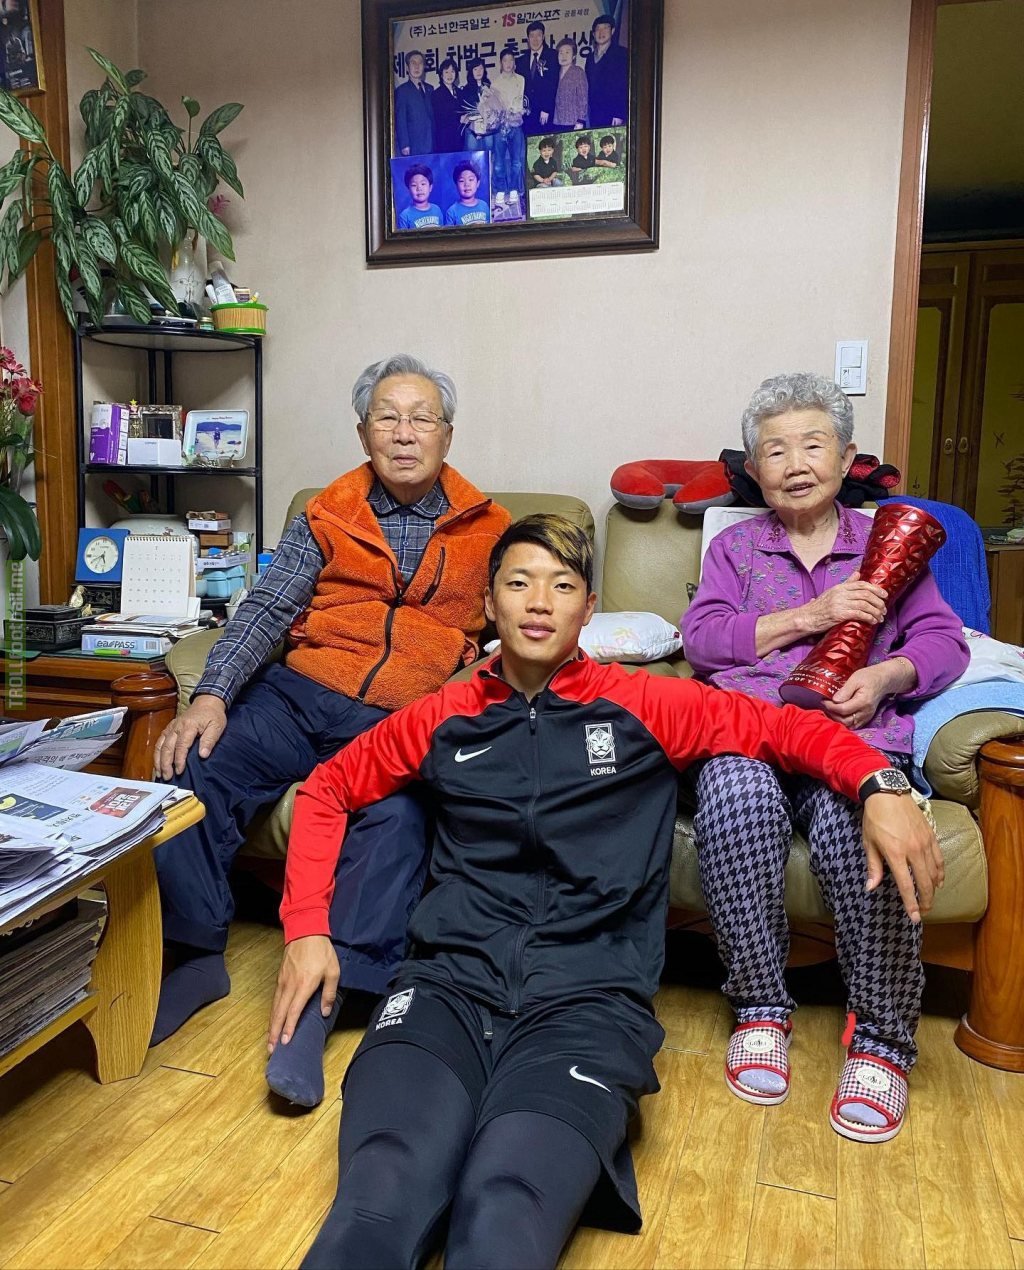 Hwang Hee-Chan with his World Cup MOTM Trophy and his Grandparents